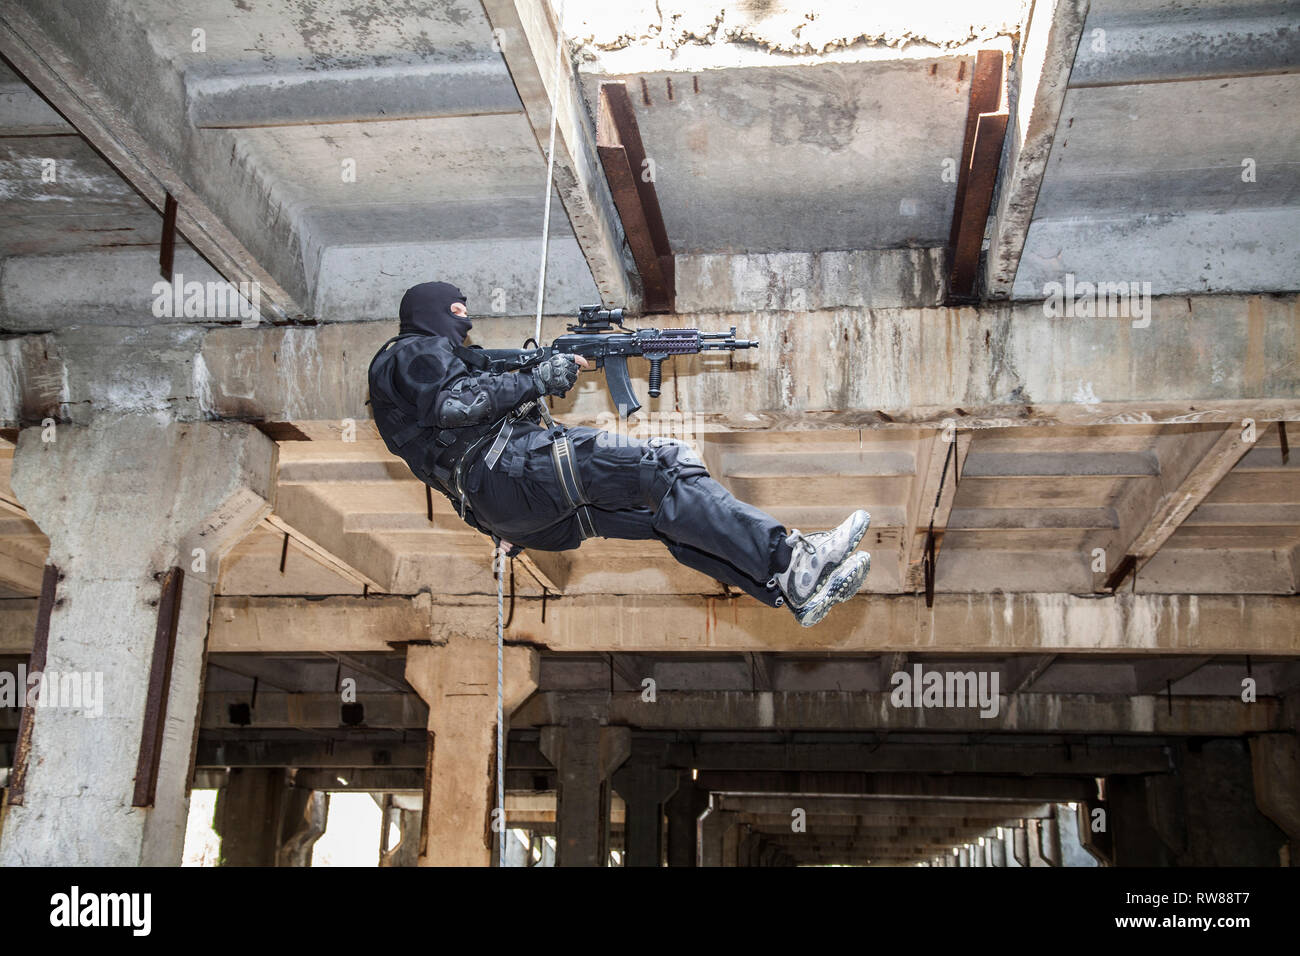 Special forces operator during assault rappelling with weapons